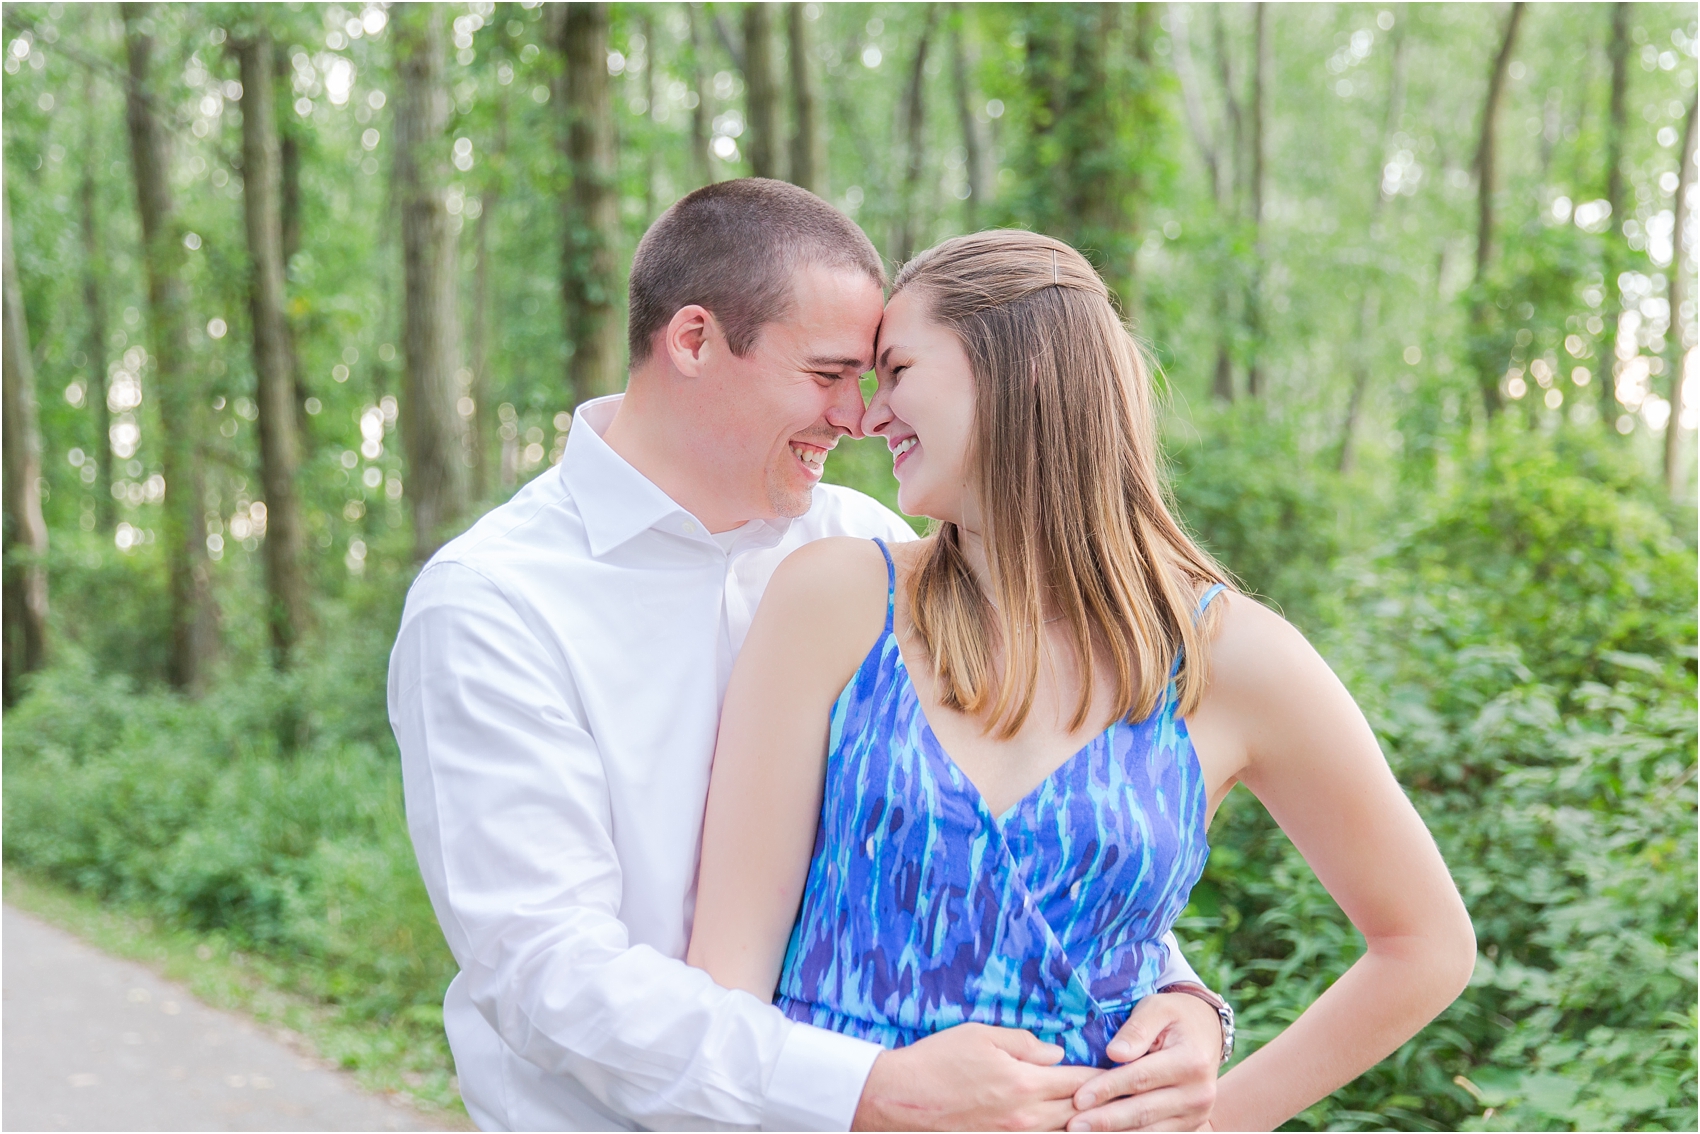 emotional-candid-romantic-engagement-photos-in-detroit-chicago-northern-michigan-by-courtney-carolyn-photography_0051.jpg